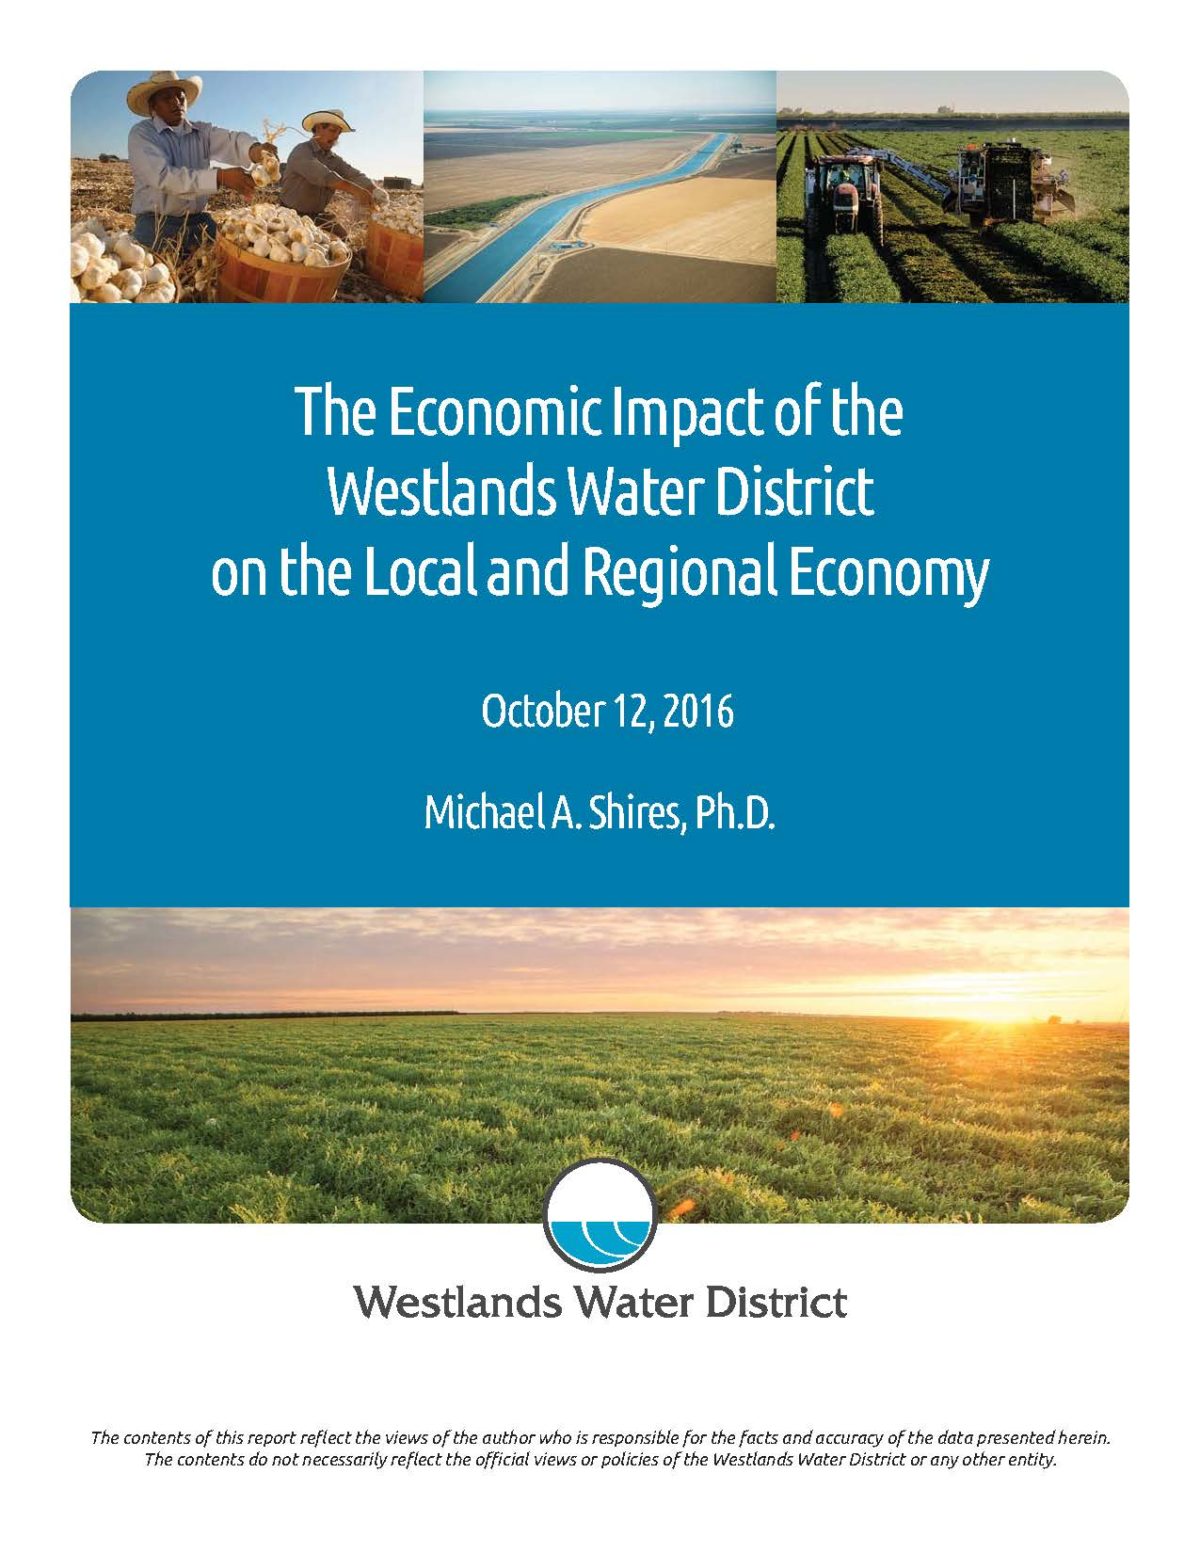 The Economic Impact of the Westlands Water District on the Local and Regional Economy